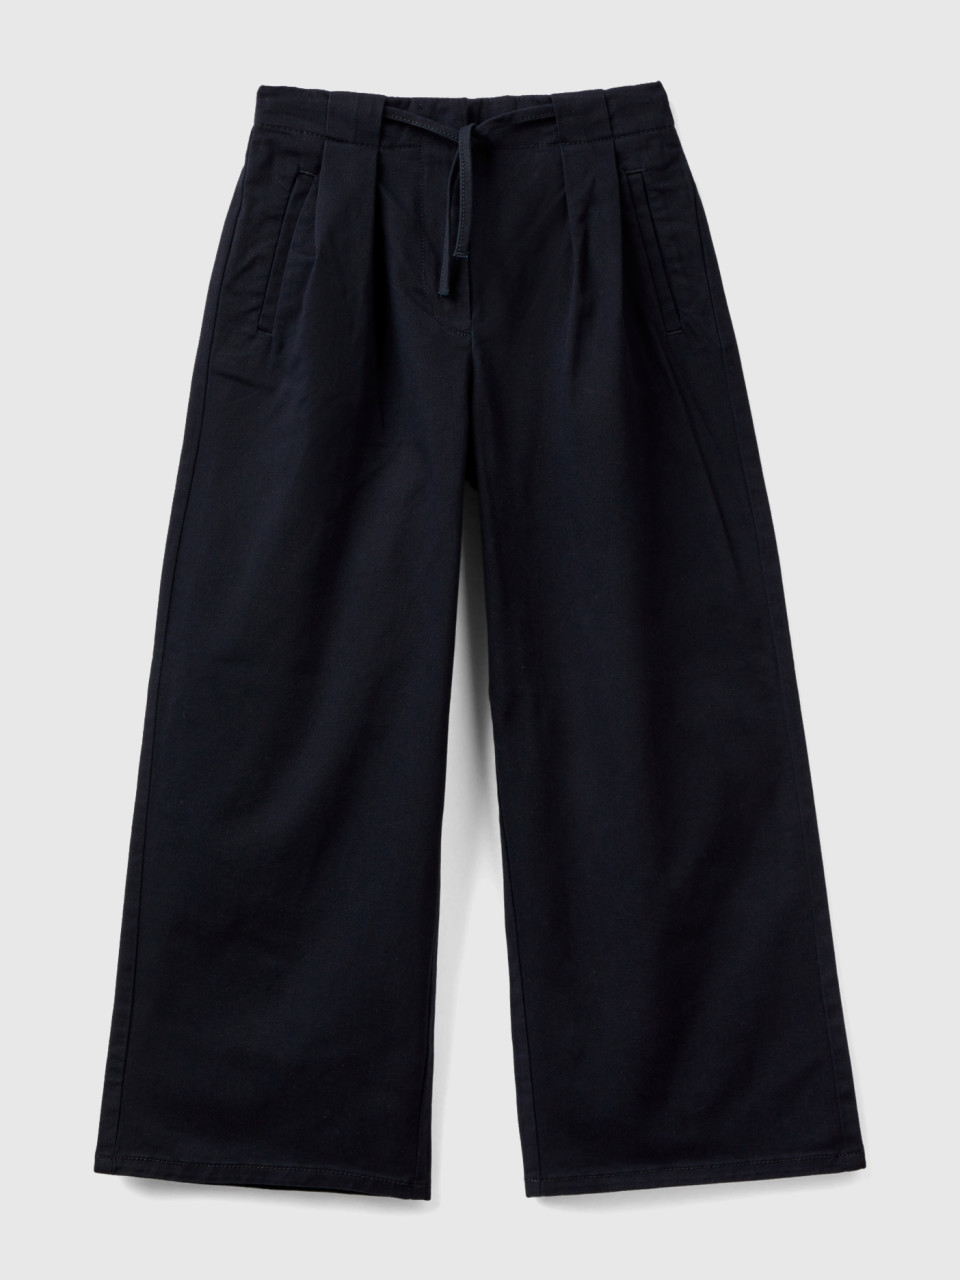 Benetton, Wide Fit Trousers In Stretch Cotton, Black, Kids